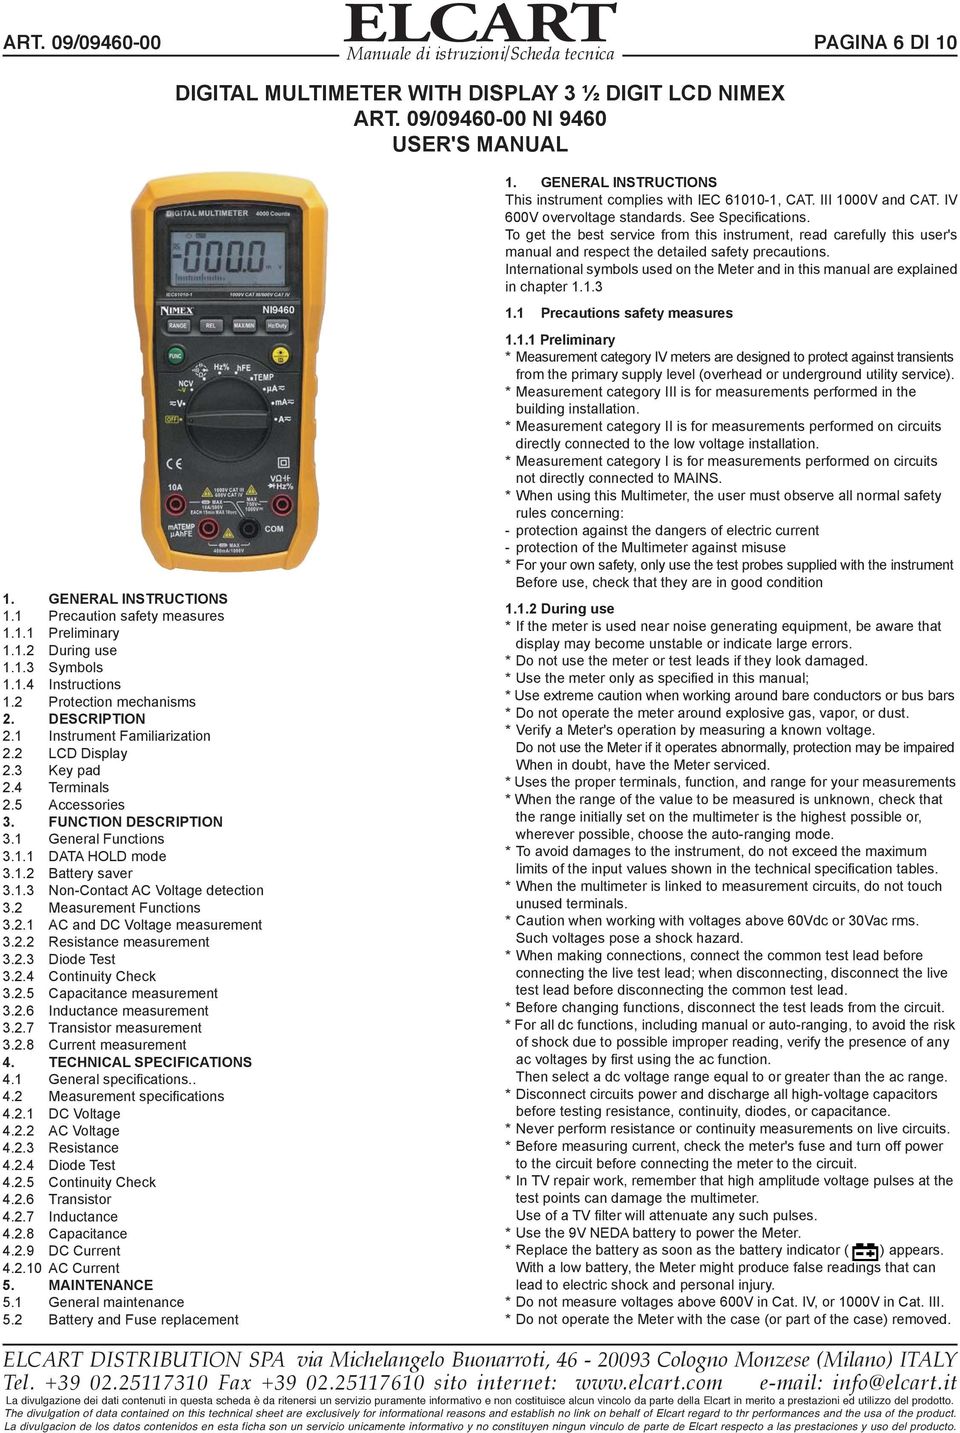 5 Accessories 3. FUNCTION DESCRIPTION 3.1 General Functions 3.1.1 DATA HOLD mode 3.1.2 Battery saver 3.1.3 Non-Contact AC Voltage detection 3.2 Measurement Functions 3.2.1 AC and DC Voltage measurement 3.